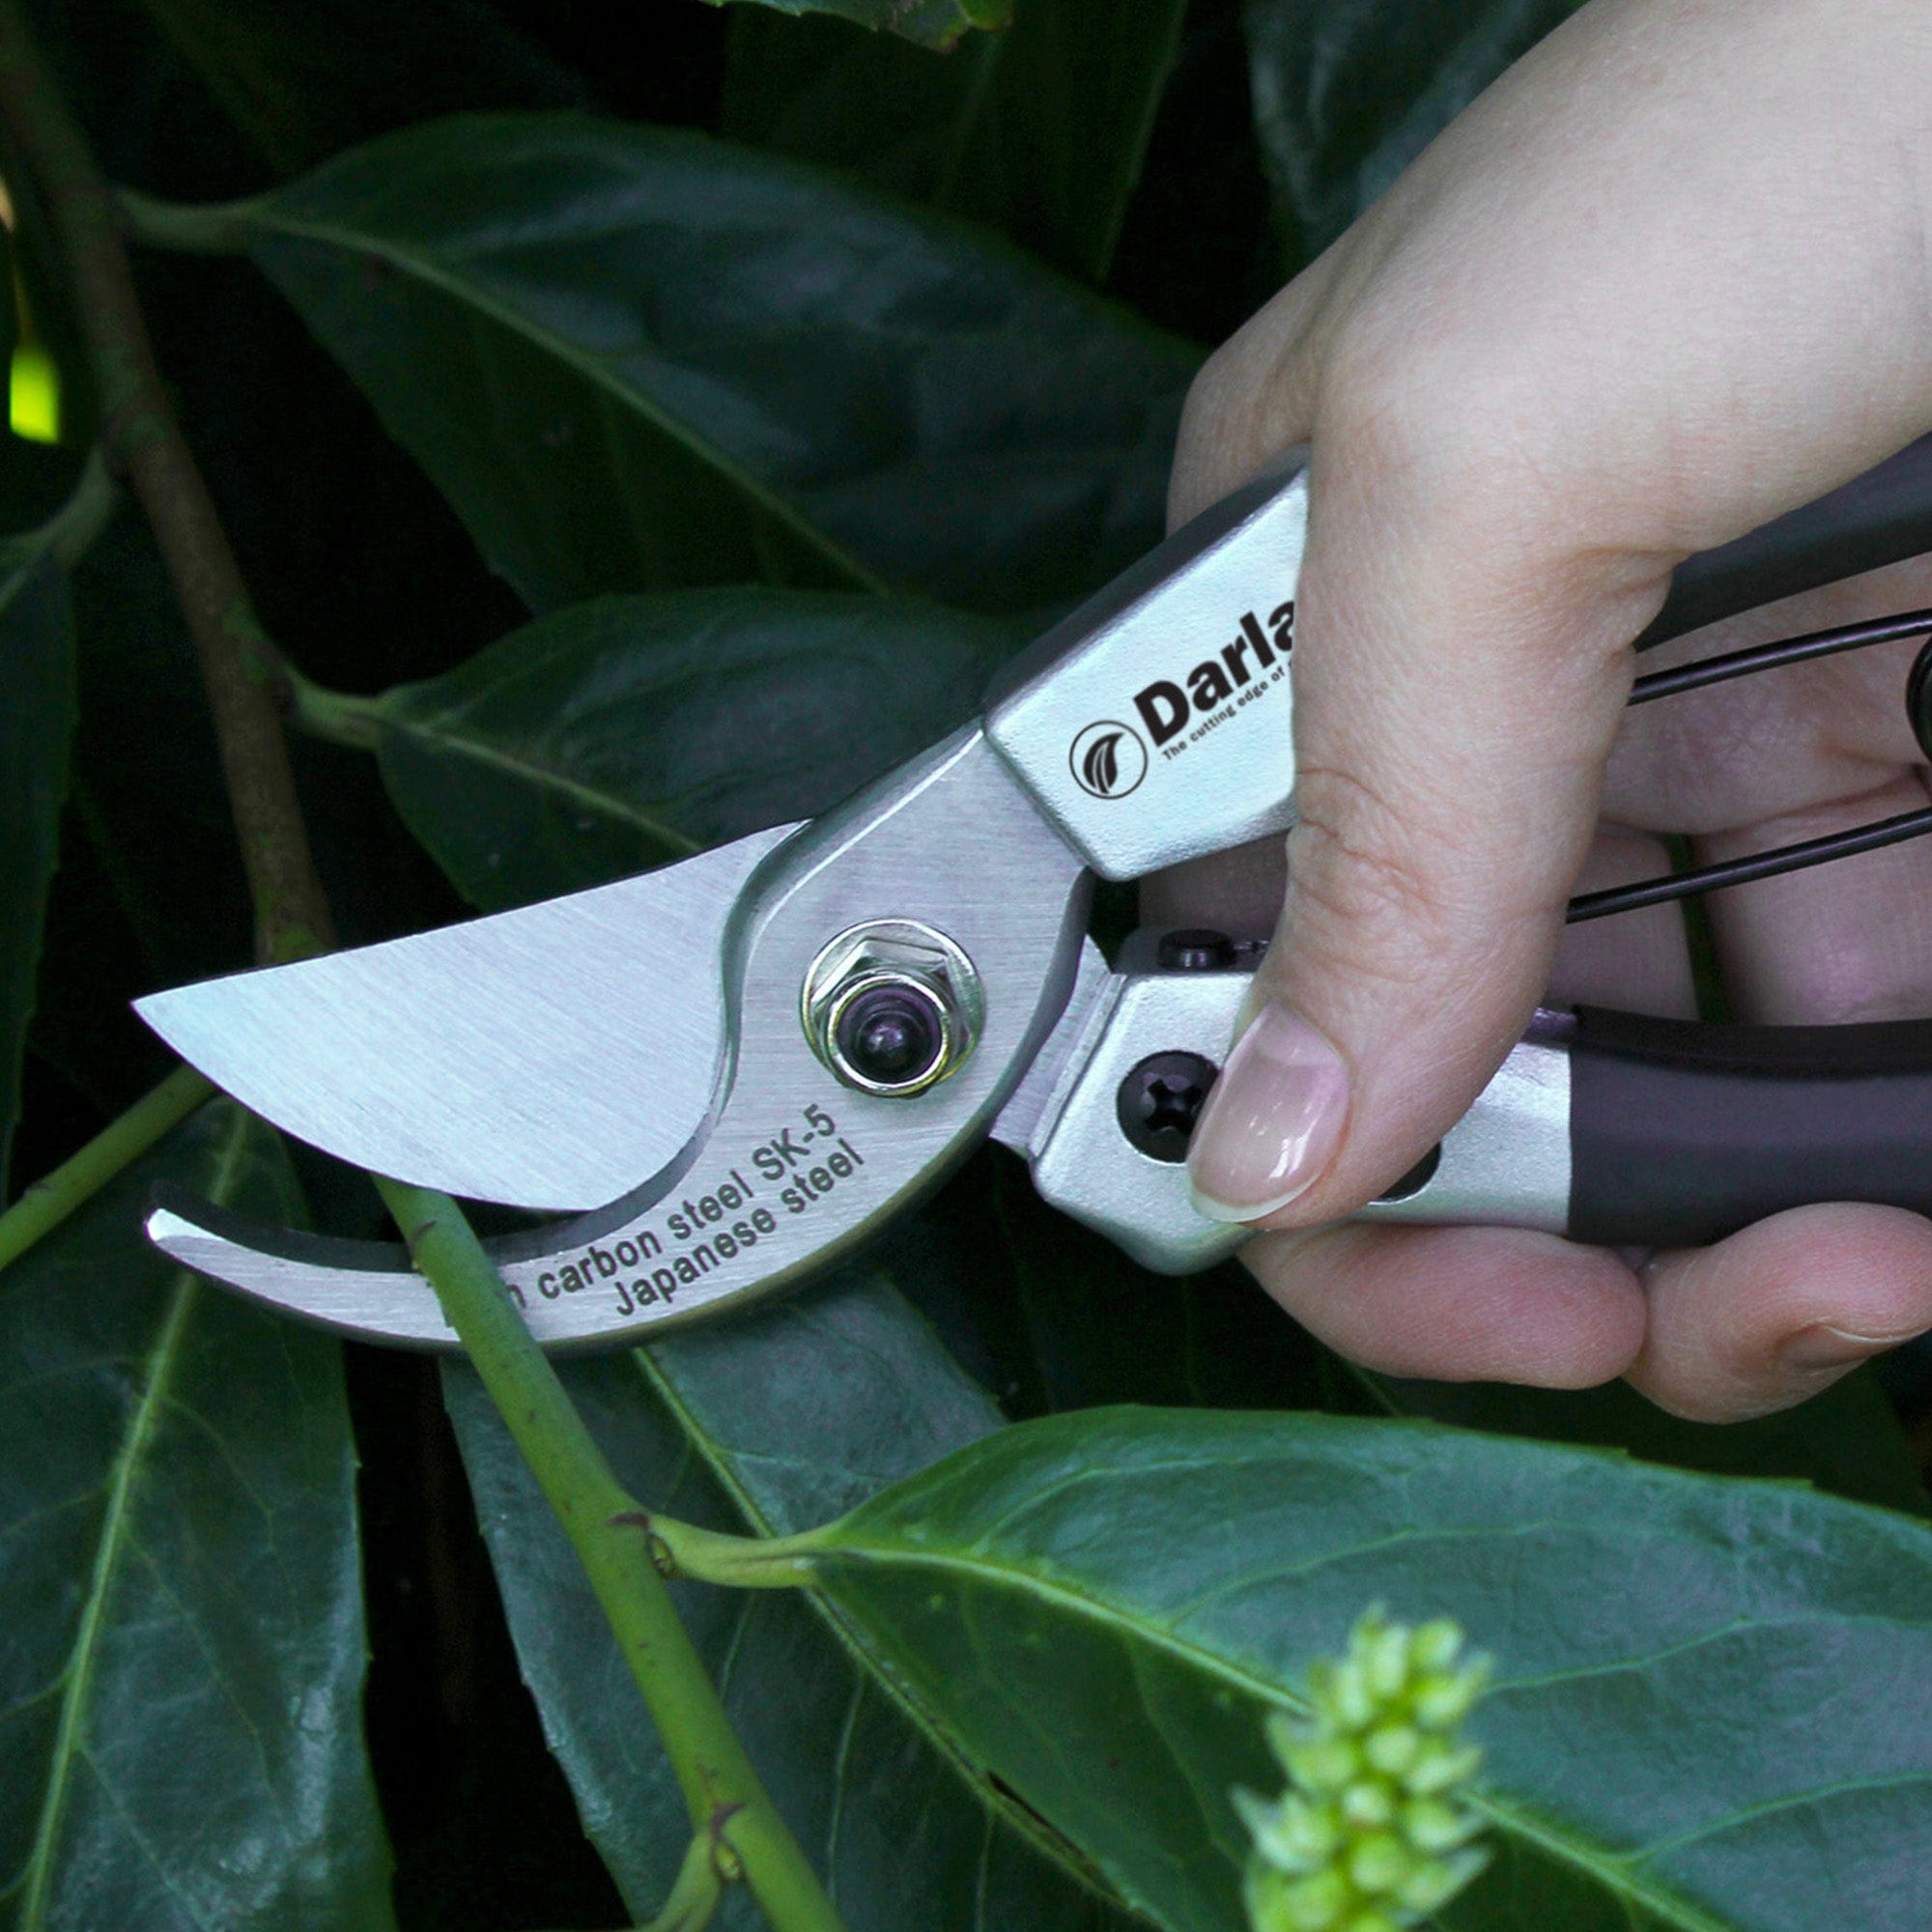 dt-brown HARDWARE Darlac Compact Secateurs